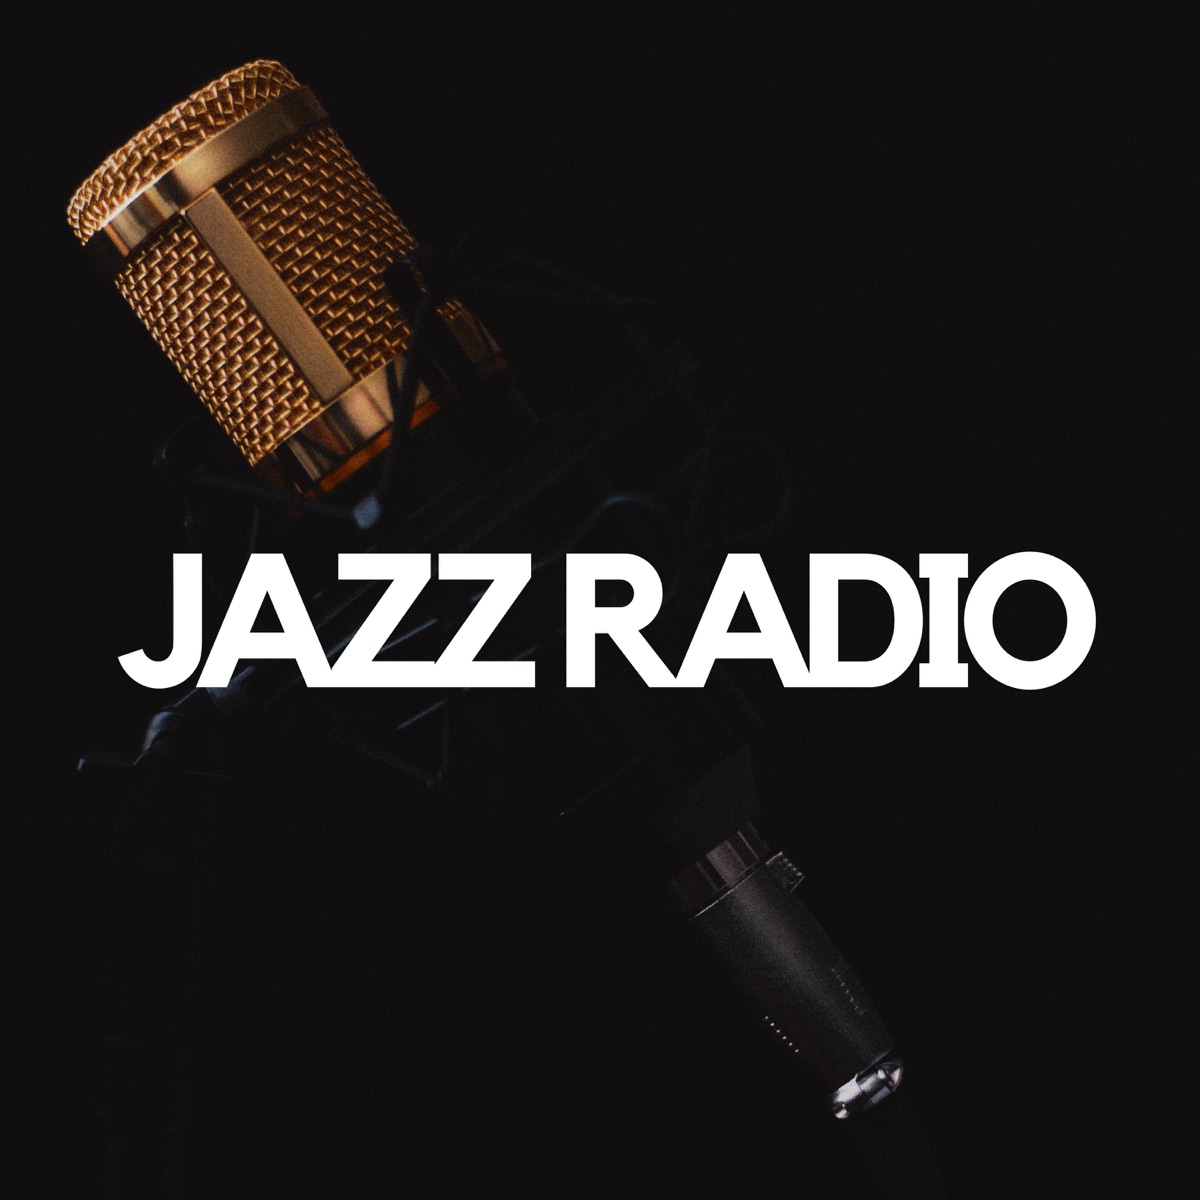 Jazz Radio - The Best Collection of Jazz Music Online, Smooth Jazz Songs,  Cool Jazz Collection - Album by Relaxing Instrumental Jazz Academy - Apple  Music